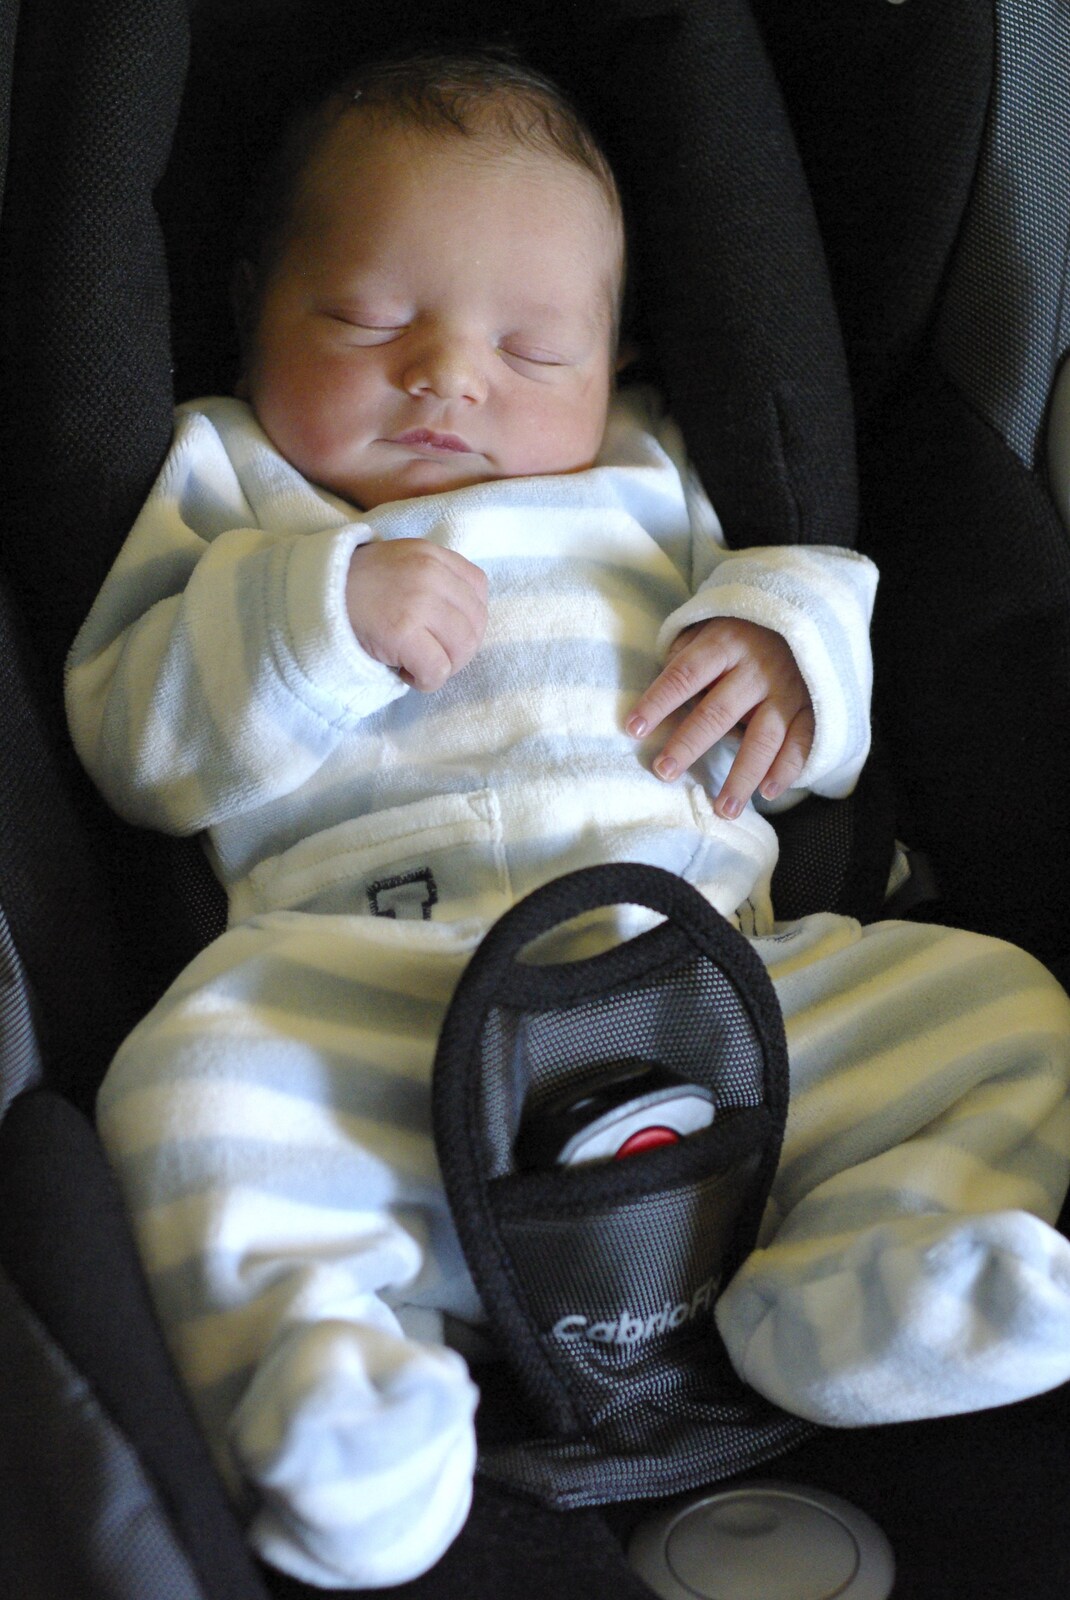 Sprogday: Nosher and Isobel Become Parents, The Rosie, Cambridge - 25th September 2008: Asleep in the car seat